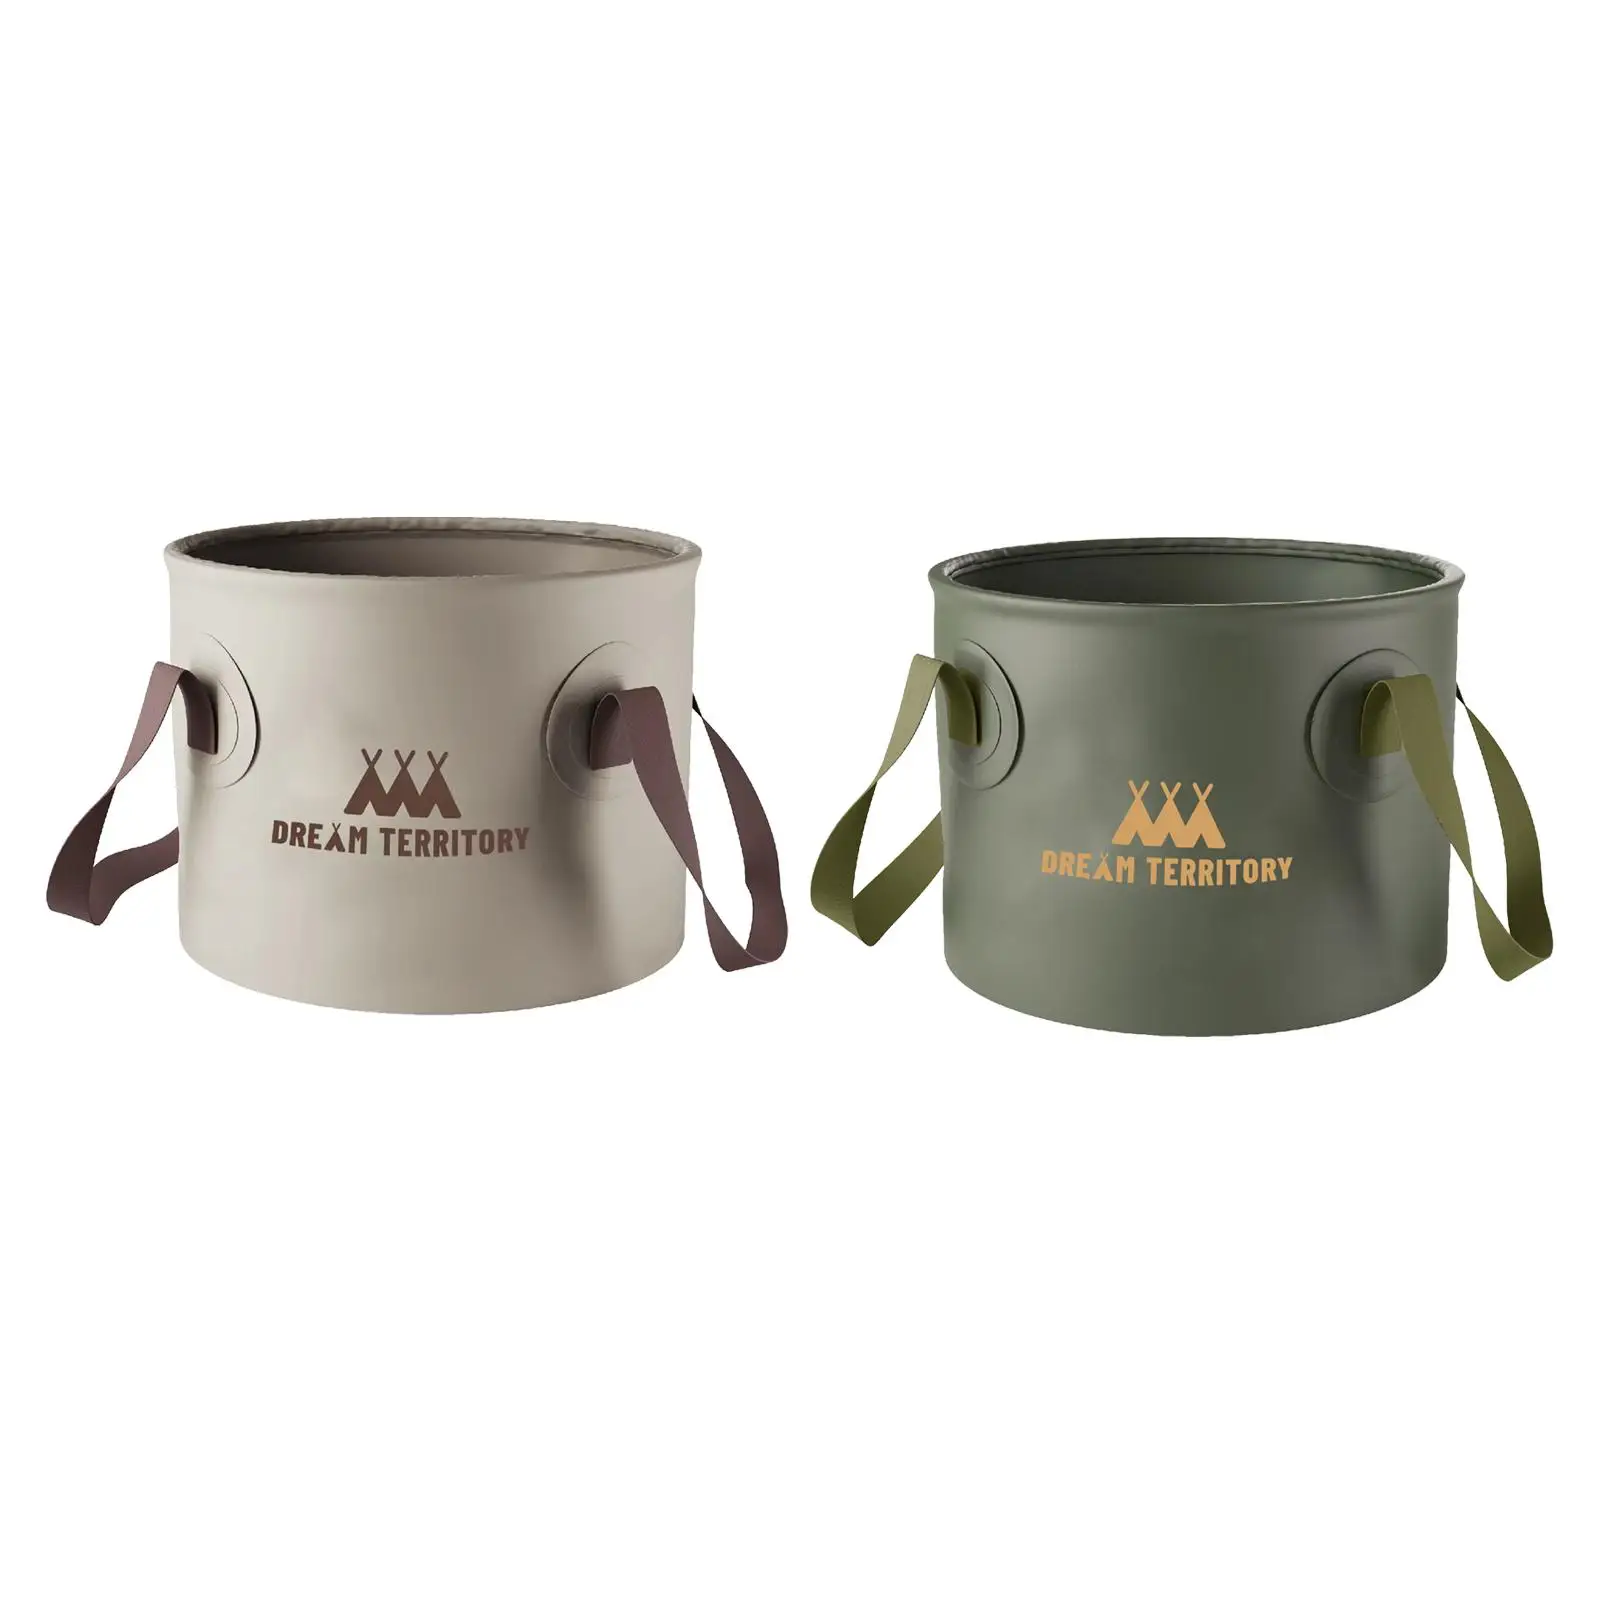 Collapsible Bucket Folding Water Storage Bucket with Handle Portable Wash Basin Water Bag Water Container for Fishing Travelling